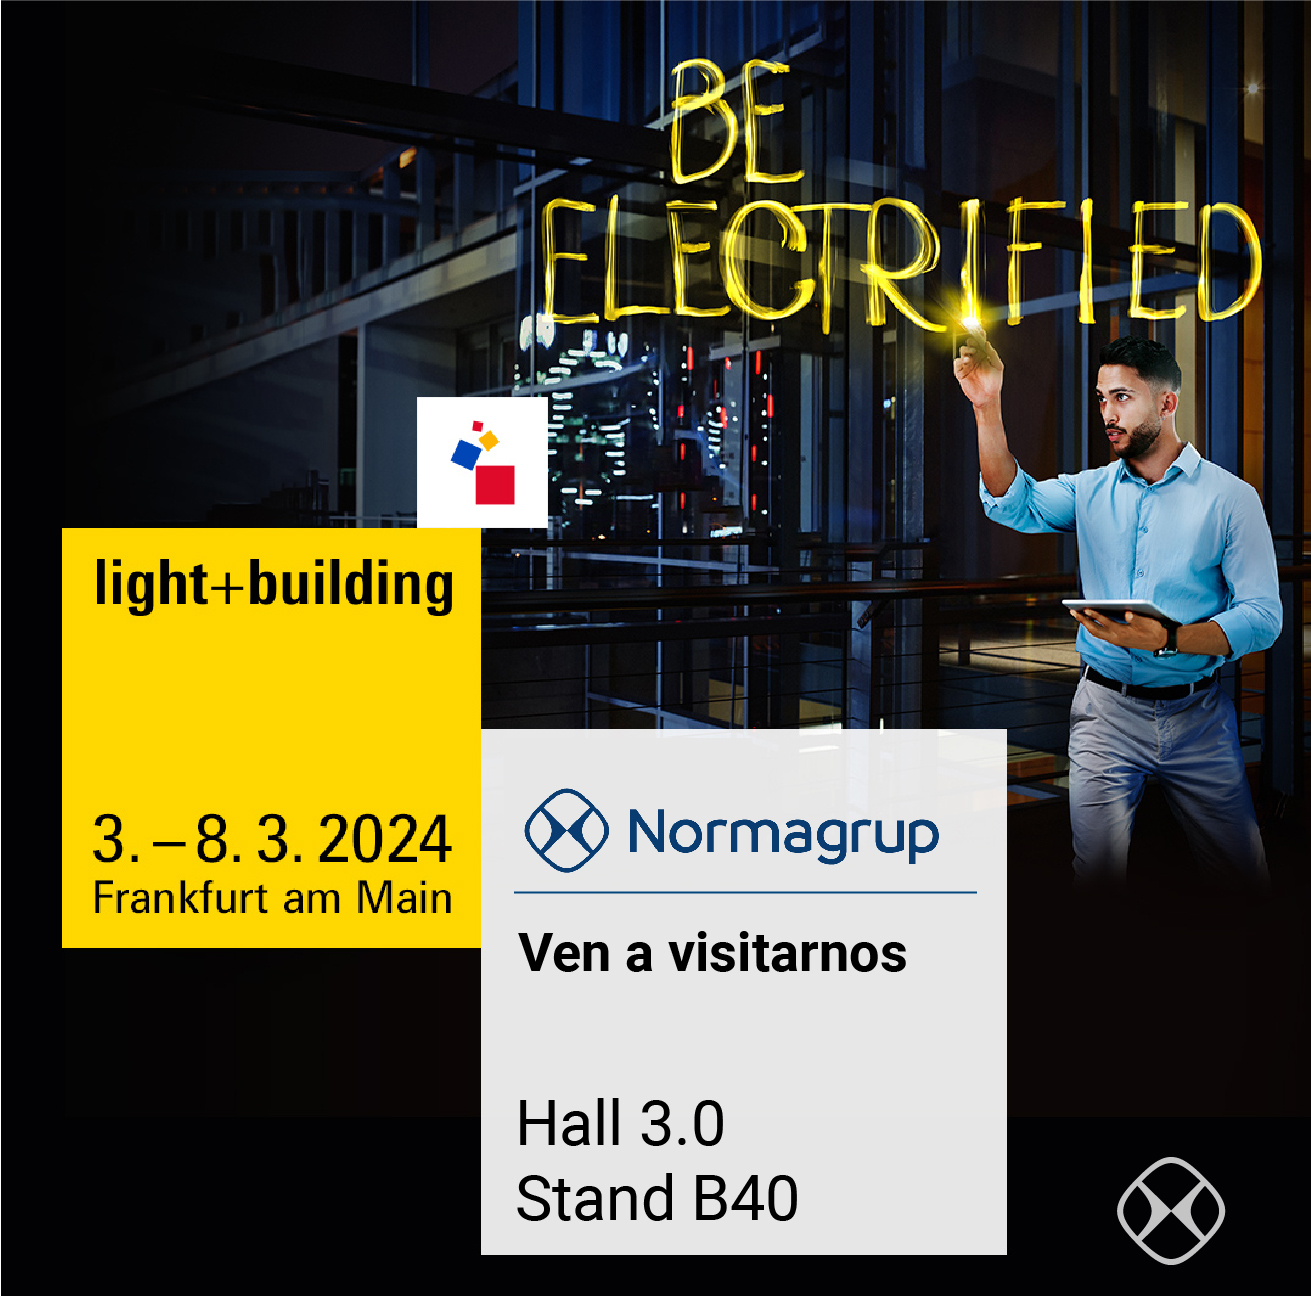 NORMAGRUP AT LIGHT + BUILDING 2024